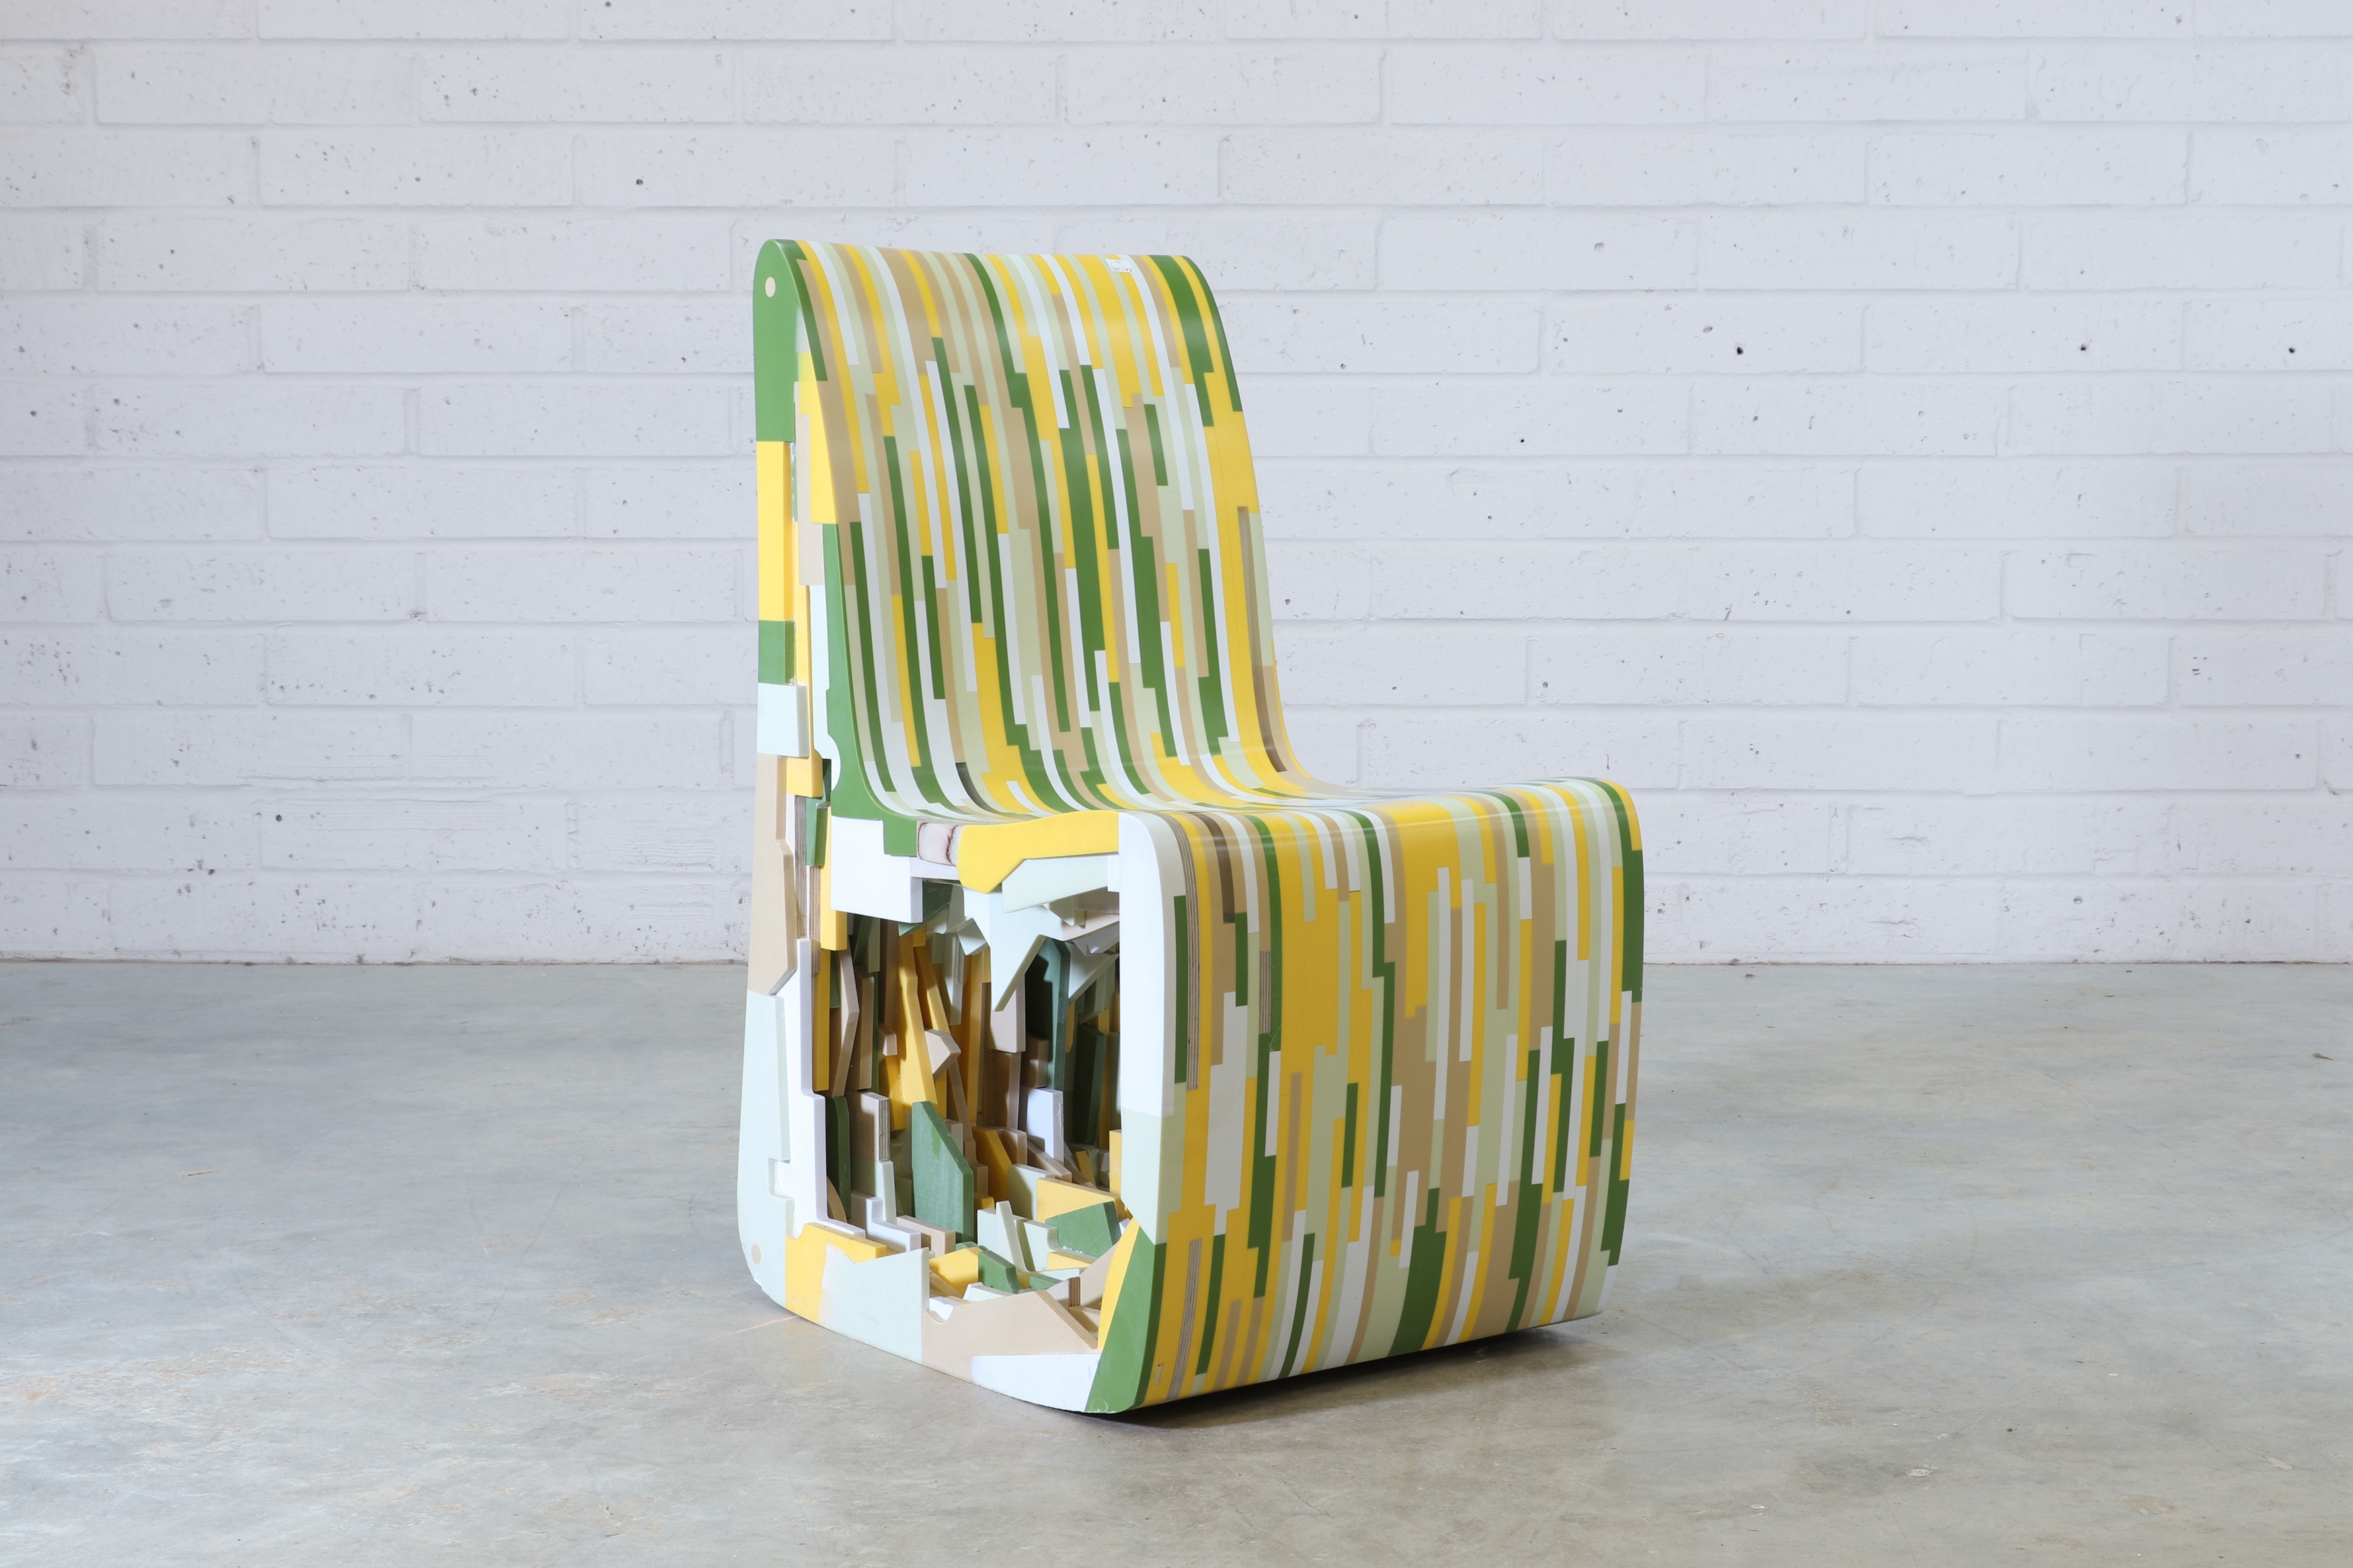 a 'Corian Chair', 2012, designed as part of the 'Leftover Collection', the Corian frame finished in yellow, green, and white (£300-500)